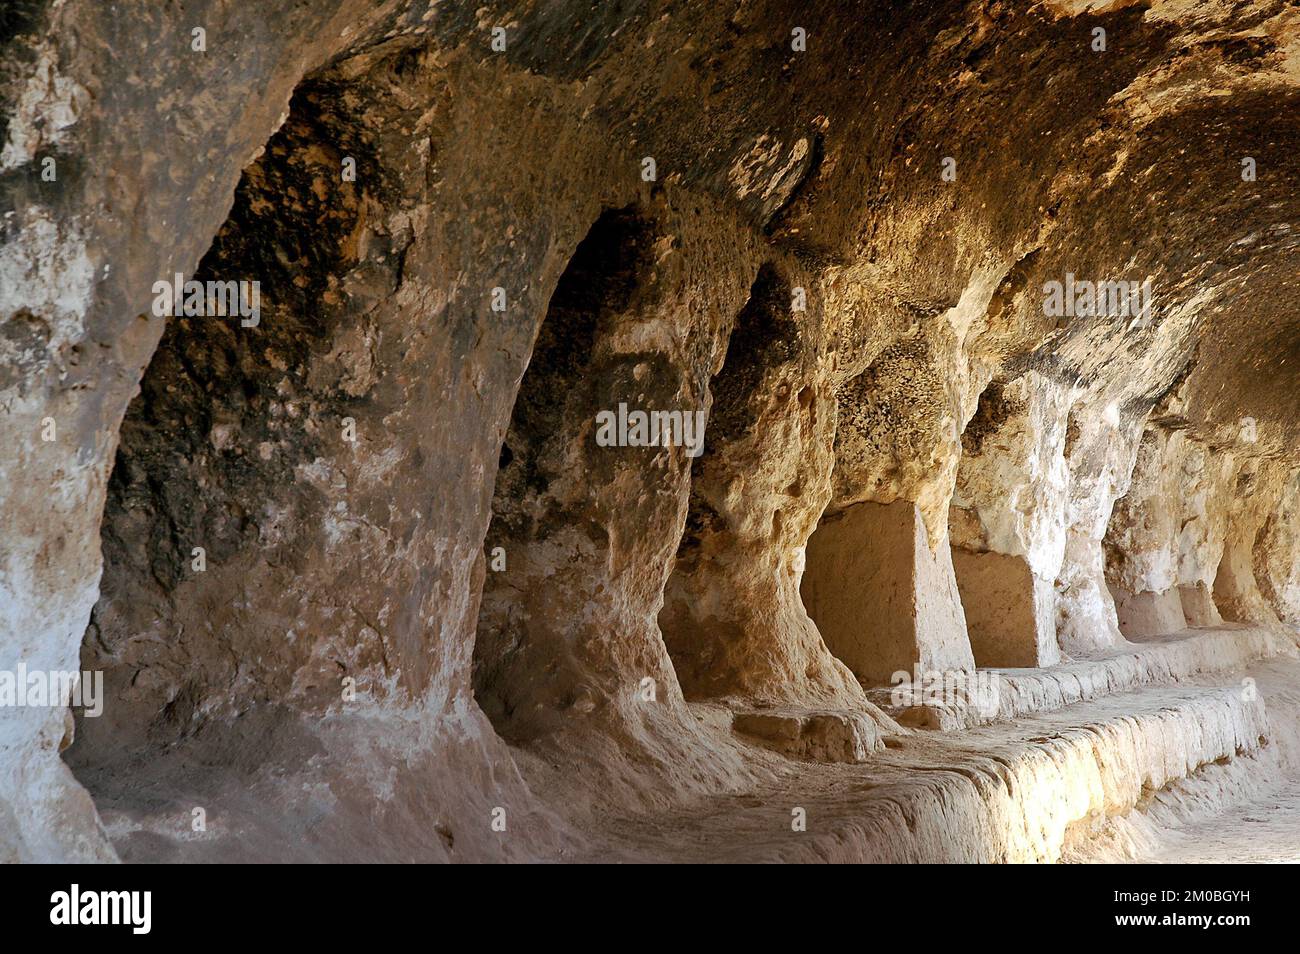 Takht-e Rostam (Takht-e Rustam) is a stupa monastery in northern Afghanistan. Inside the cave monastery showing the cave system. Stock Photo